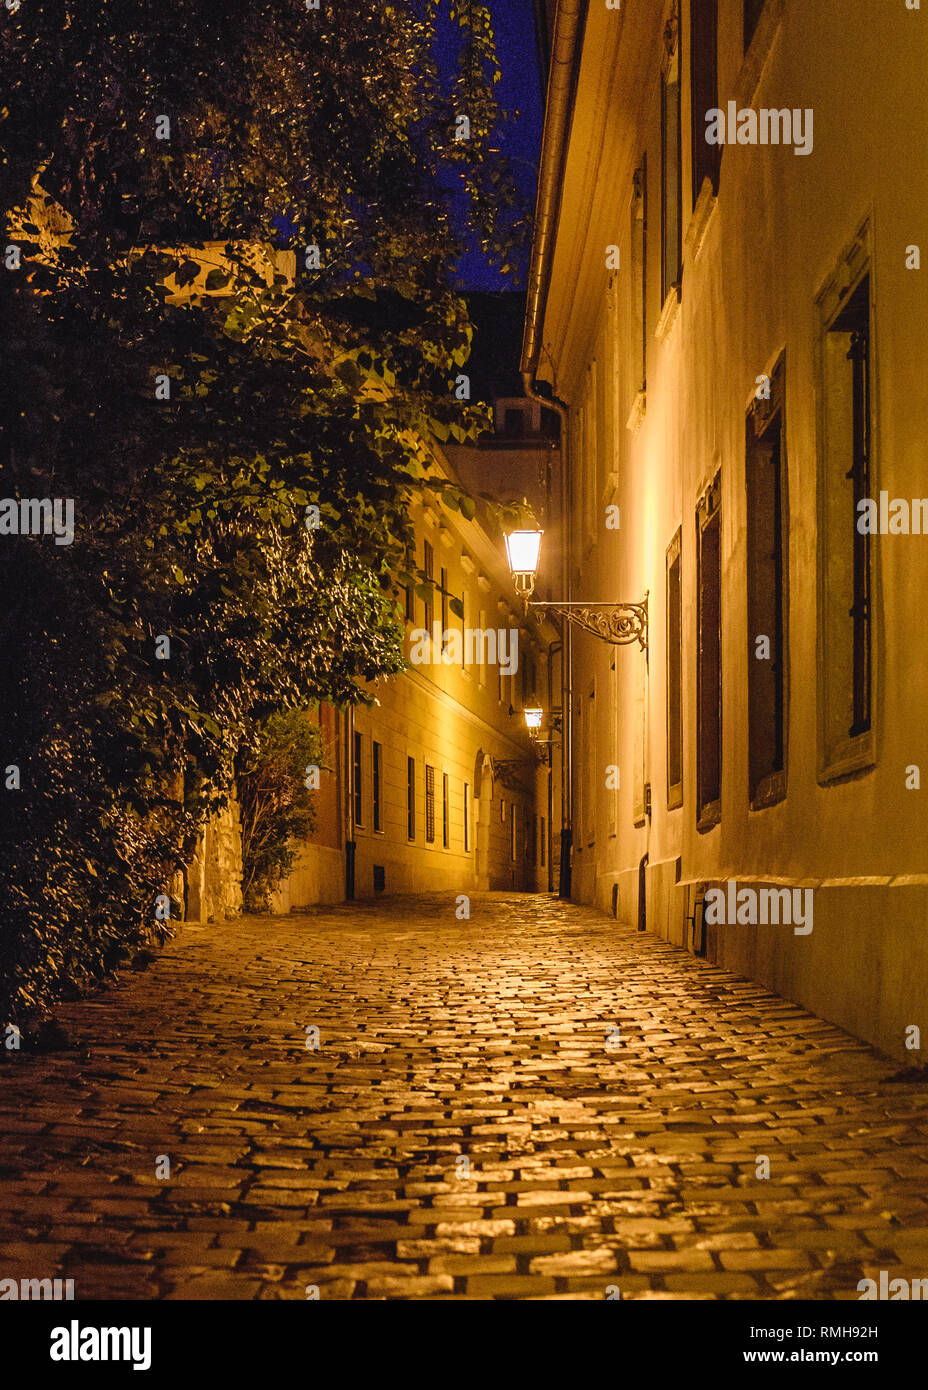 An illuminated narrow cobblestone street in the Castle District of Budapest at night Stock Photo